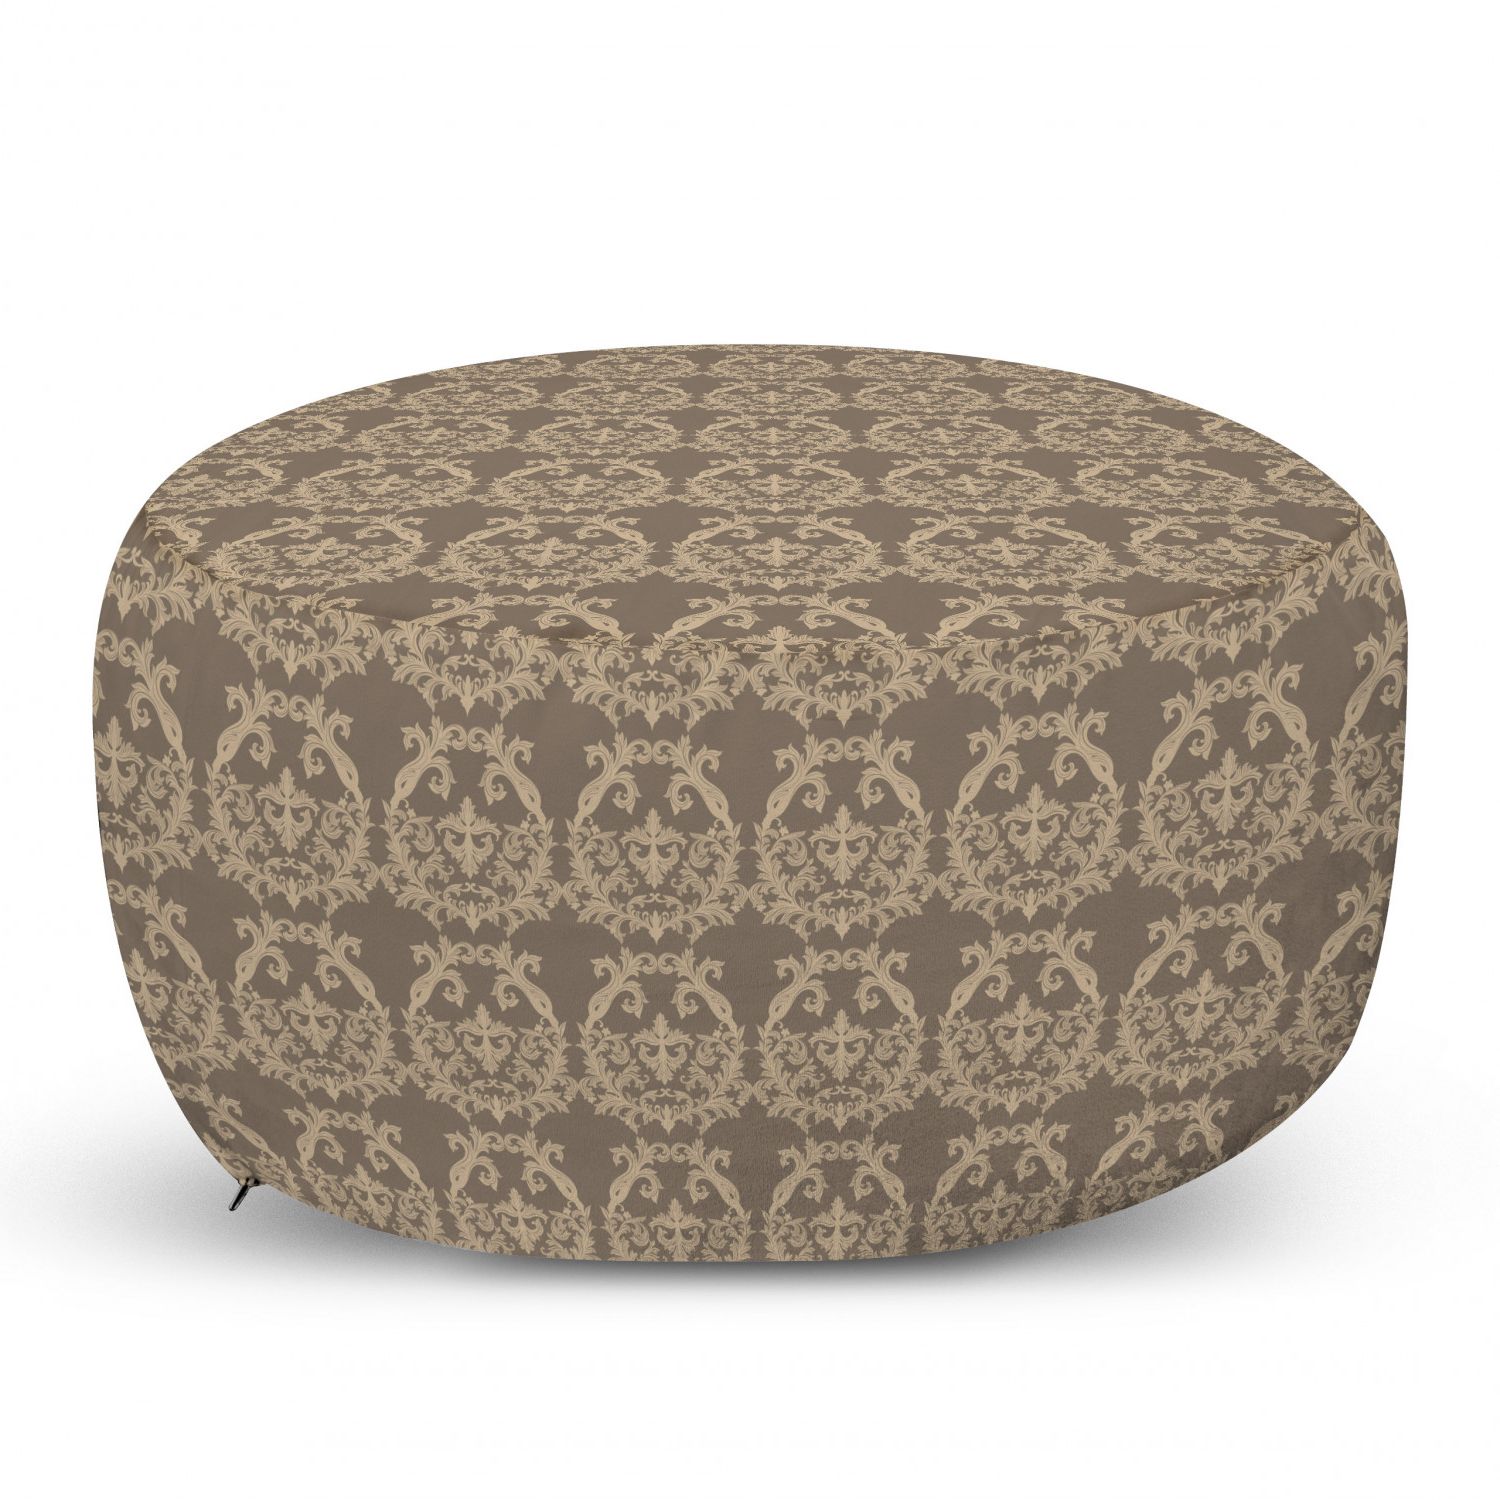 Most Current Warm Brown Cowhide Pouf Ottomans Inside Taupe Ottoman Pouf, Royal Victorian Botanical Design Exquisite Floral (View 6 of 10)